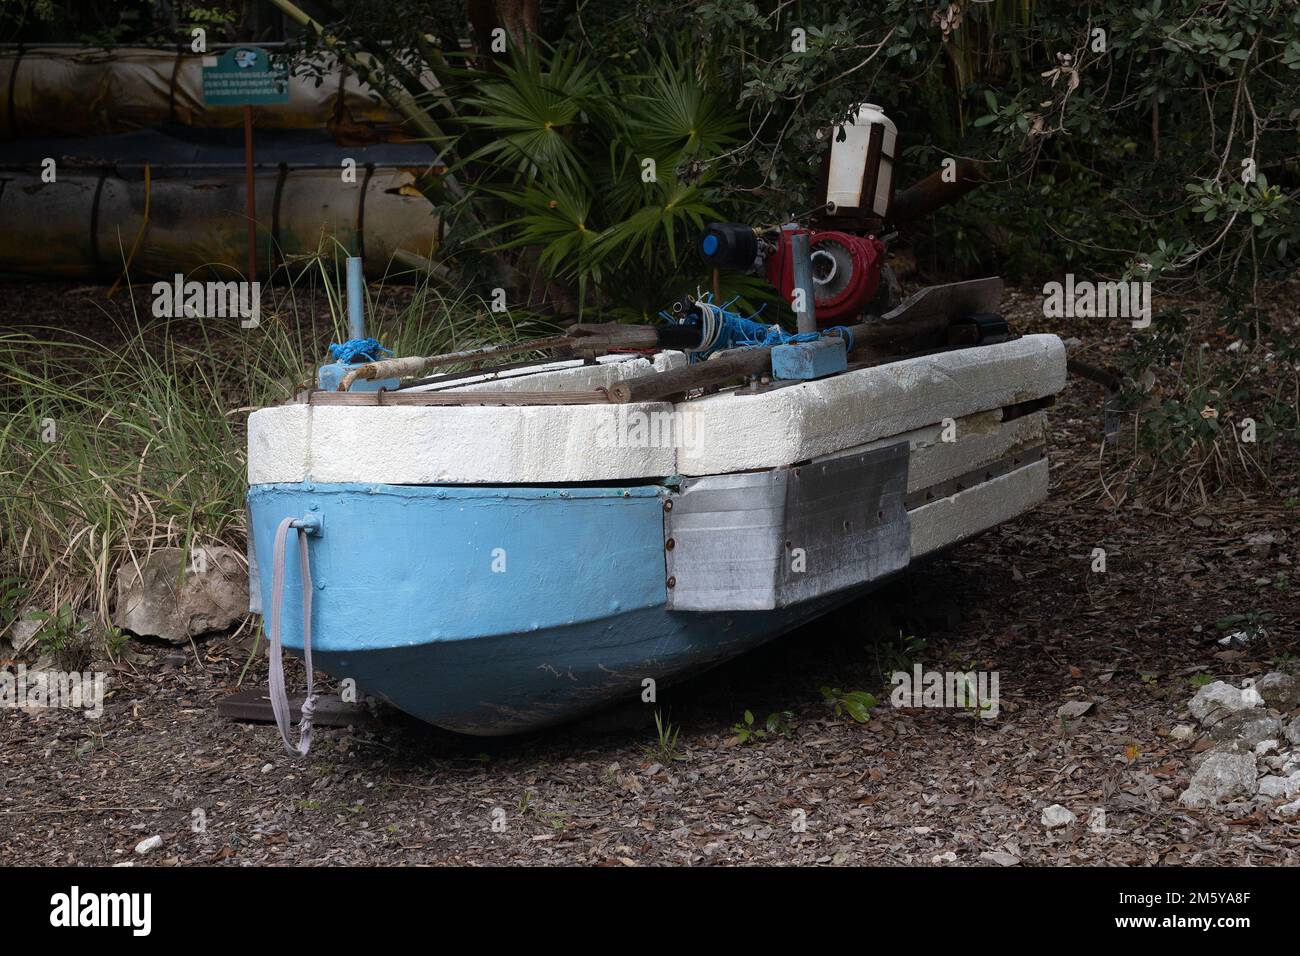 A display of chug boats - Cuban refugee boats - in Key West, Florida. Stock Photo